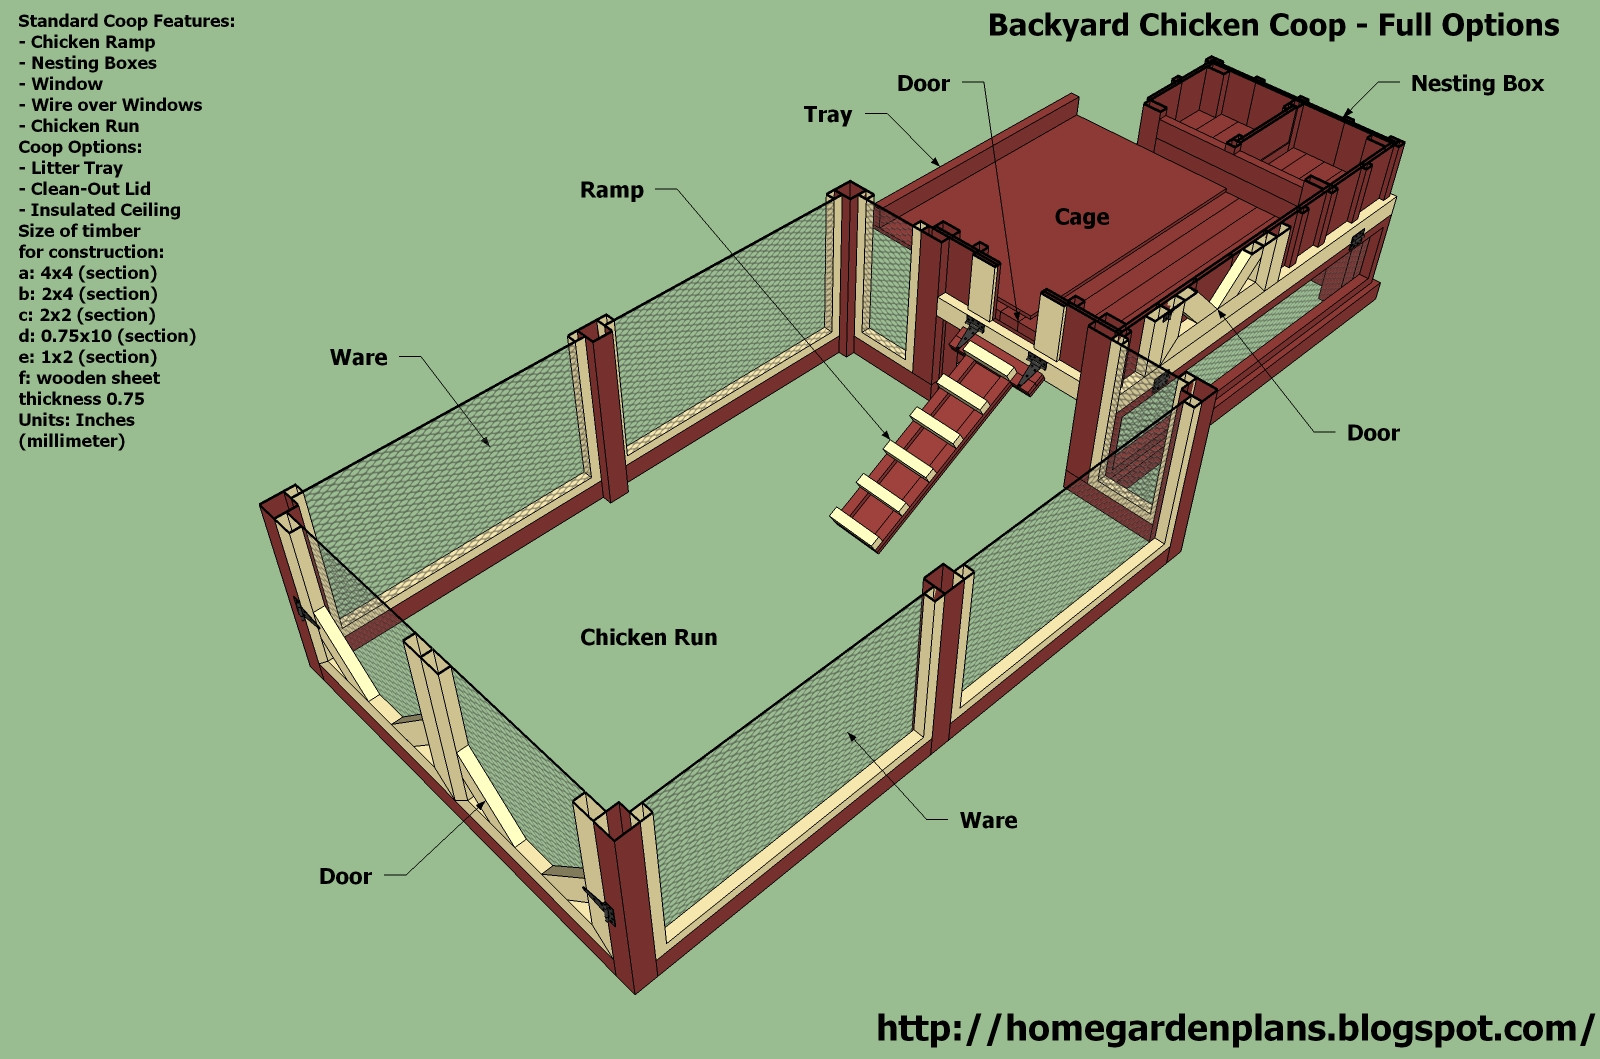 Backyard Chicken Coop Plans Free
 New Plan Topic Plans for large chicken coop